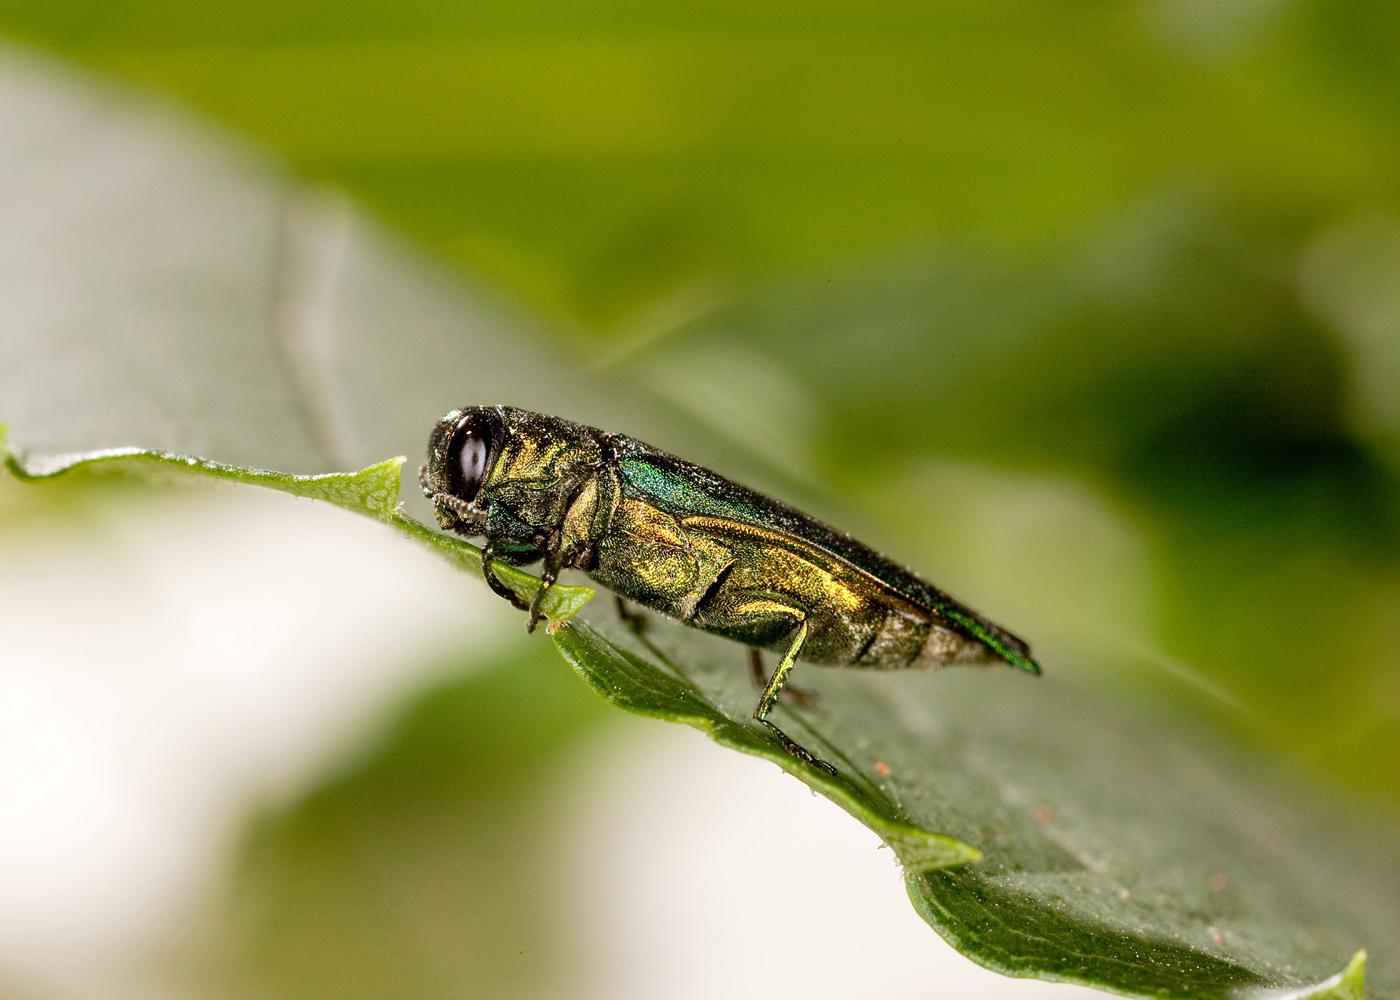 The emerald ash borer is metallic green in color and about 1/2 inch long. The beetle's larva tunnels under the bark and disrupts the ash tree's absorption of food and water, eventually starving and killing it. (Photo by USDA ARS/Stephen Ausmus)